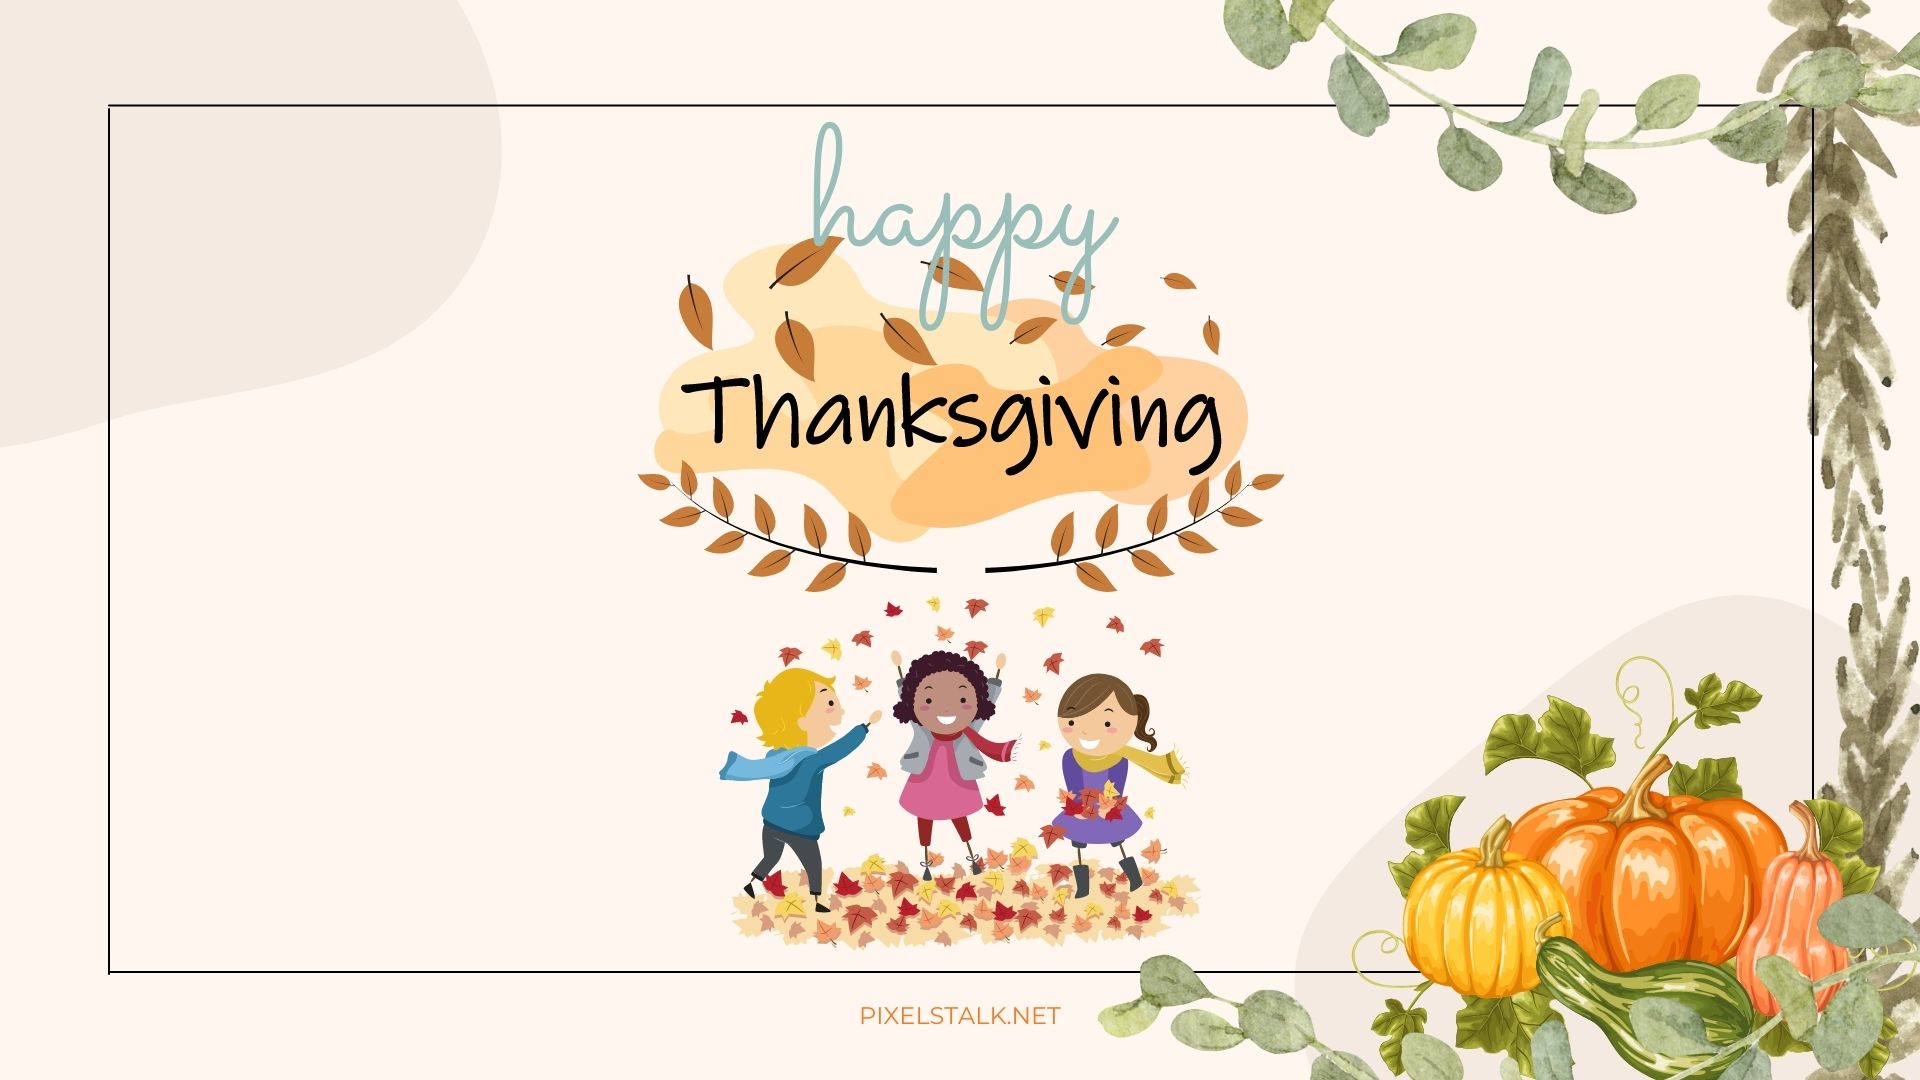 Funny Thanksgiving Wallpaper Free Download